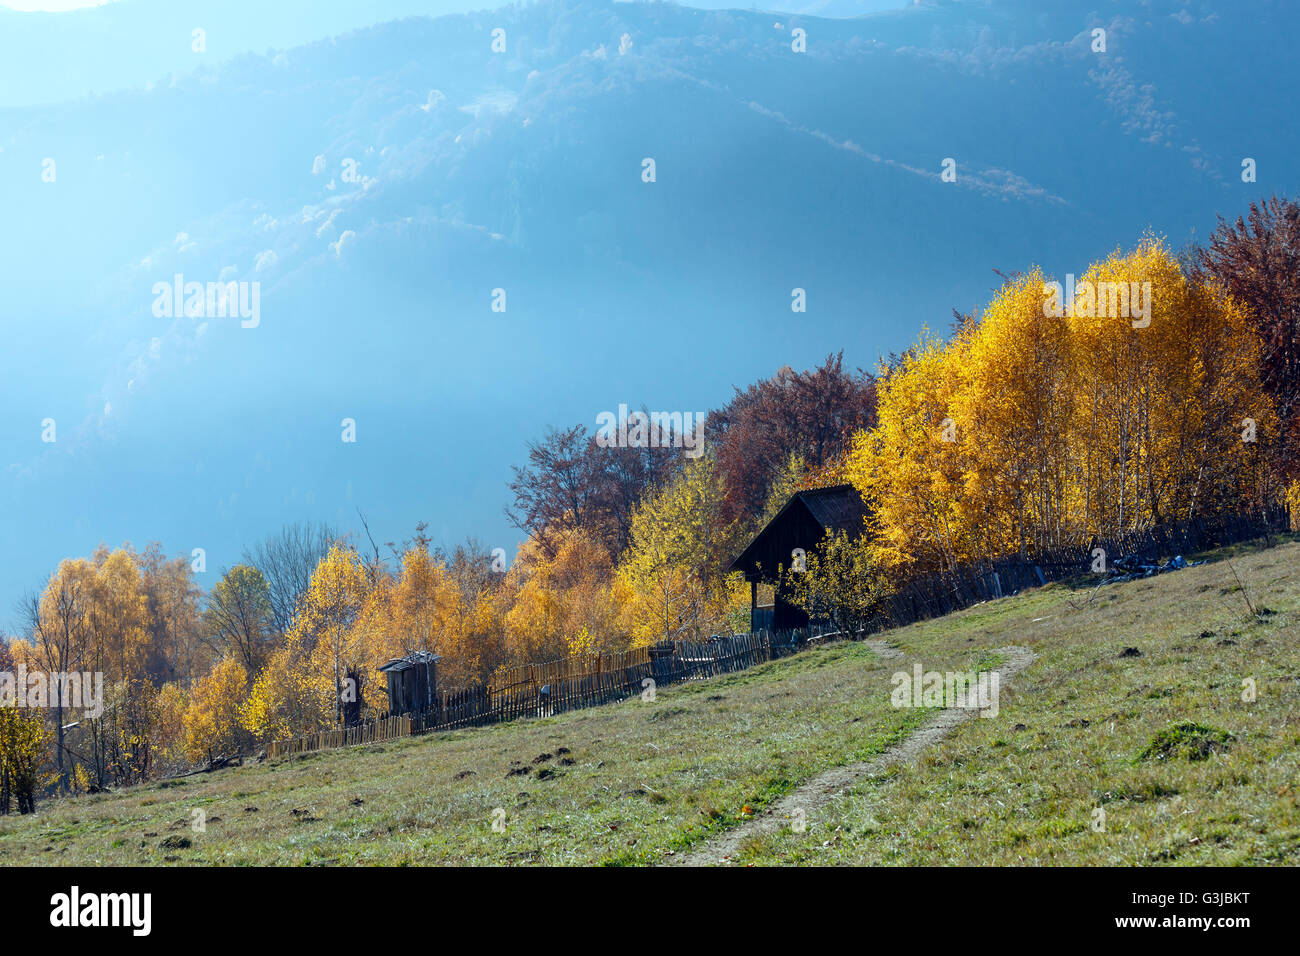 Autumn misty mountain slope with wooden structures behind fence and yellow birch trees. Stock Photo